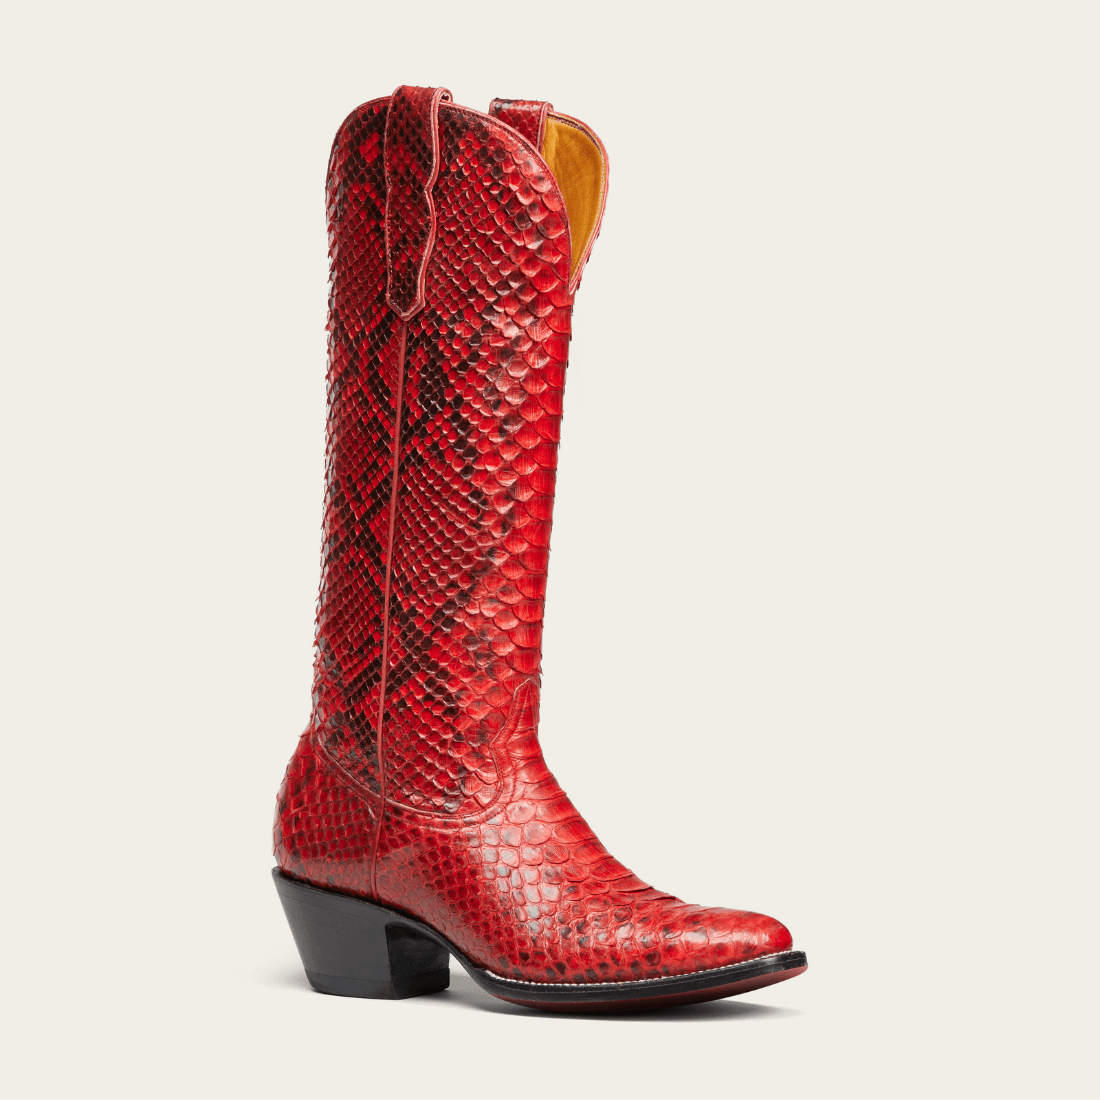 CITY Boots Midland Women's Red Python Cowboy Boots - CITY Boots